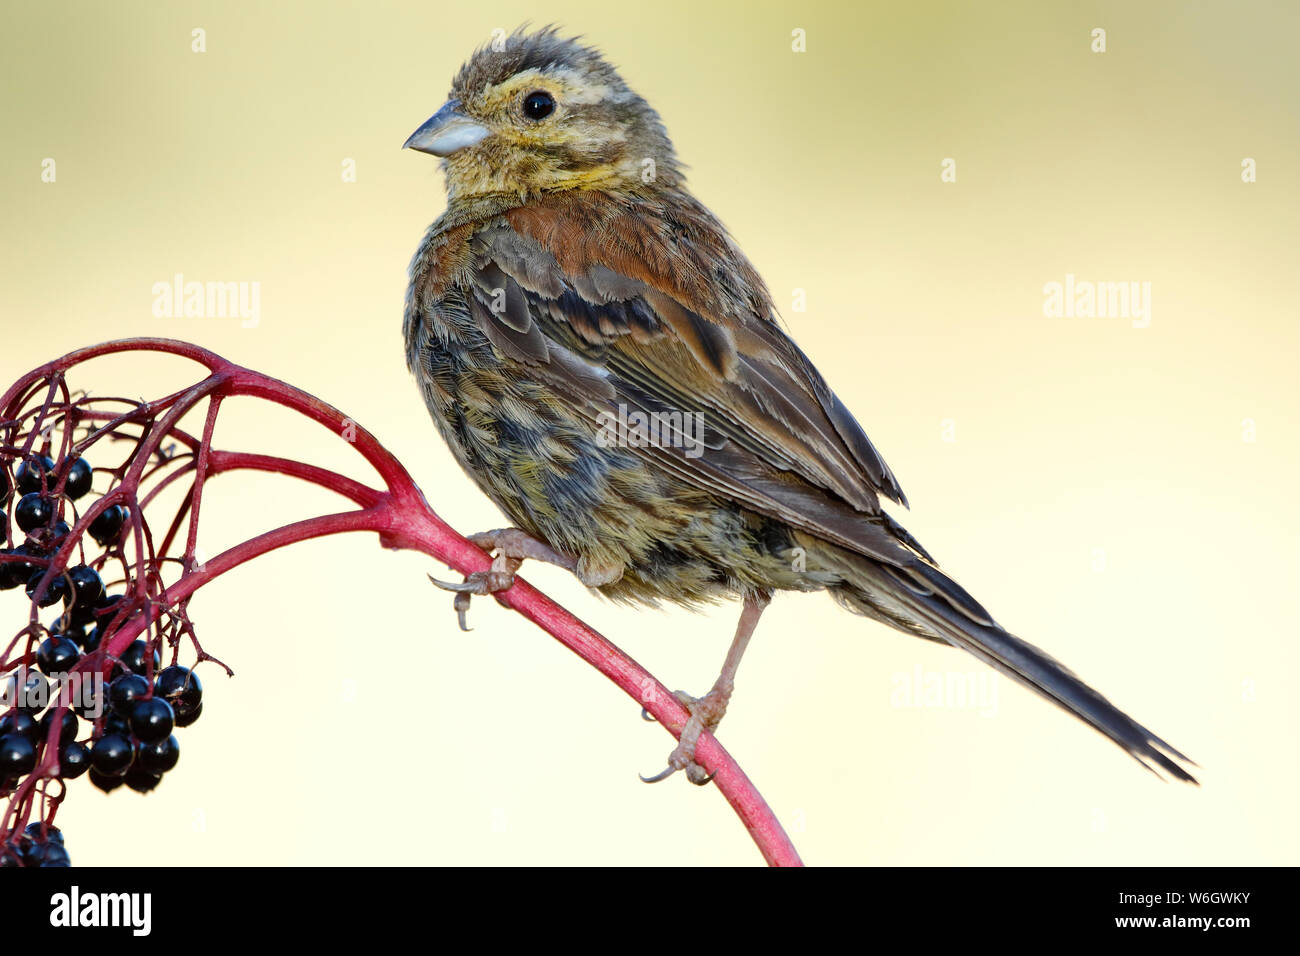 Cirl Bunting - Emberiza cirlus sitting on the branch on a uniform background. Spain Stock Photo